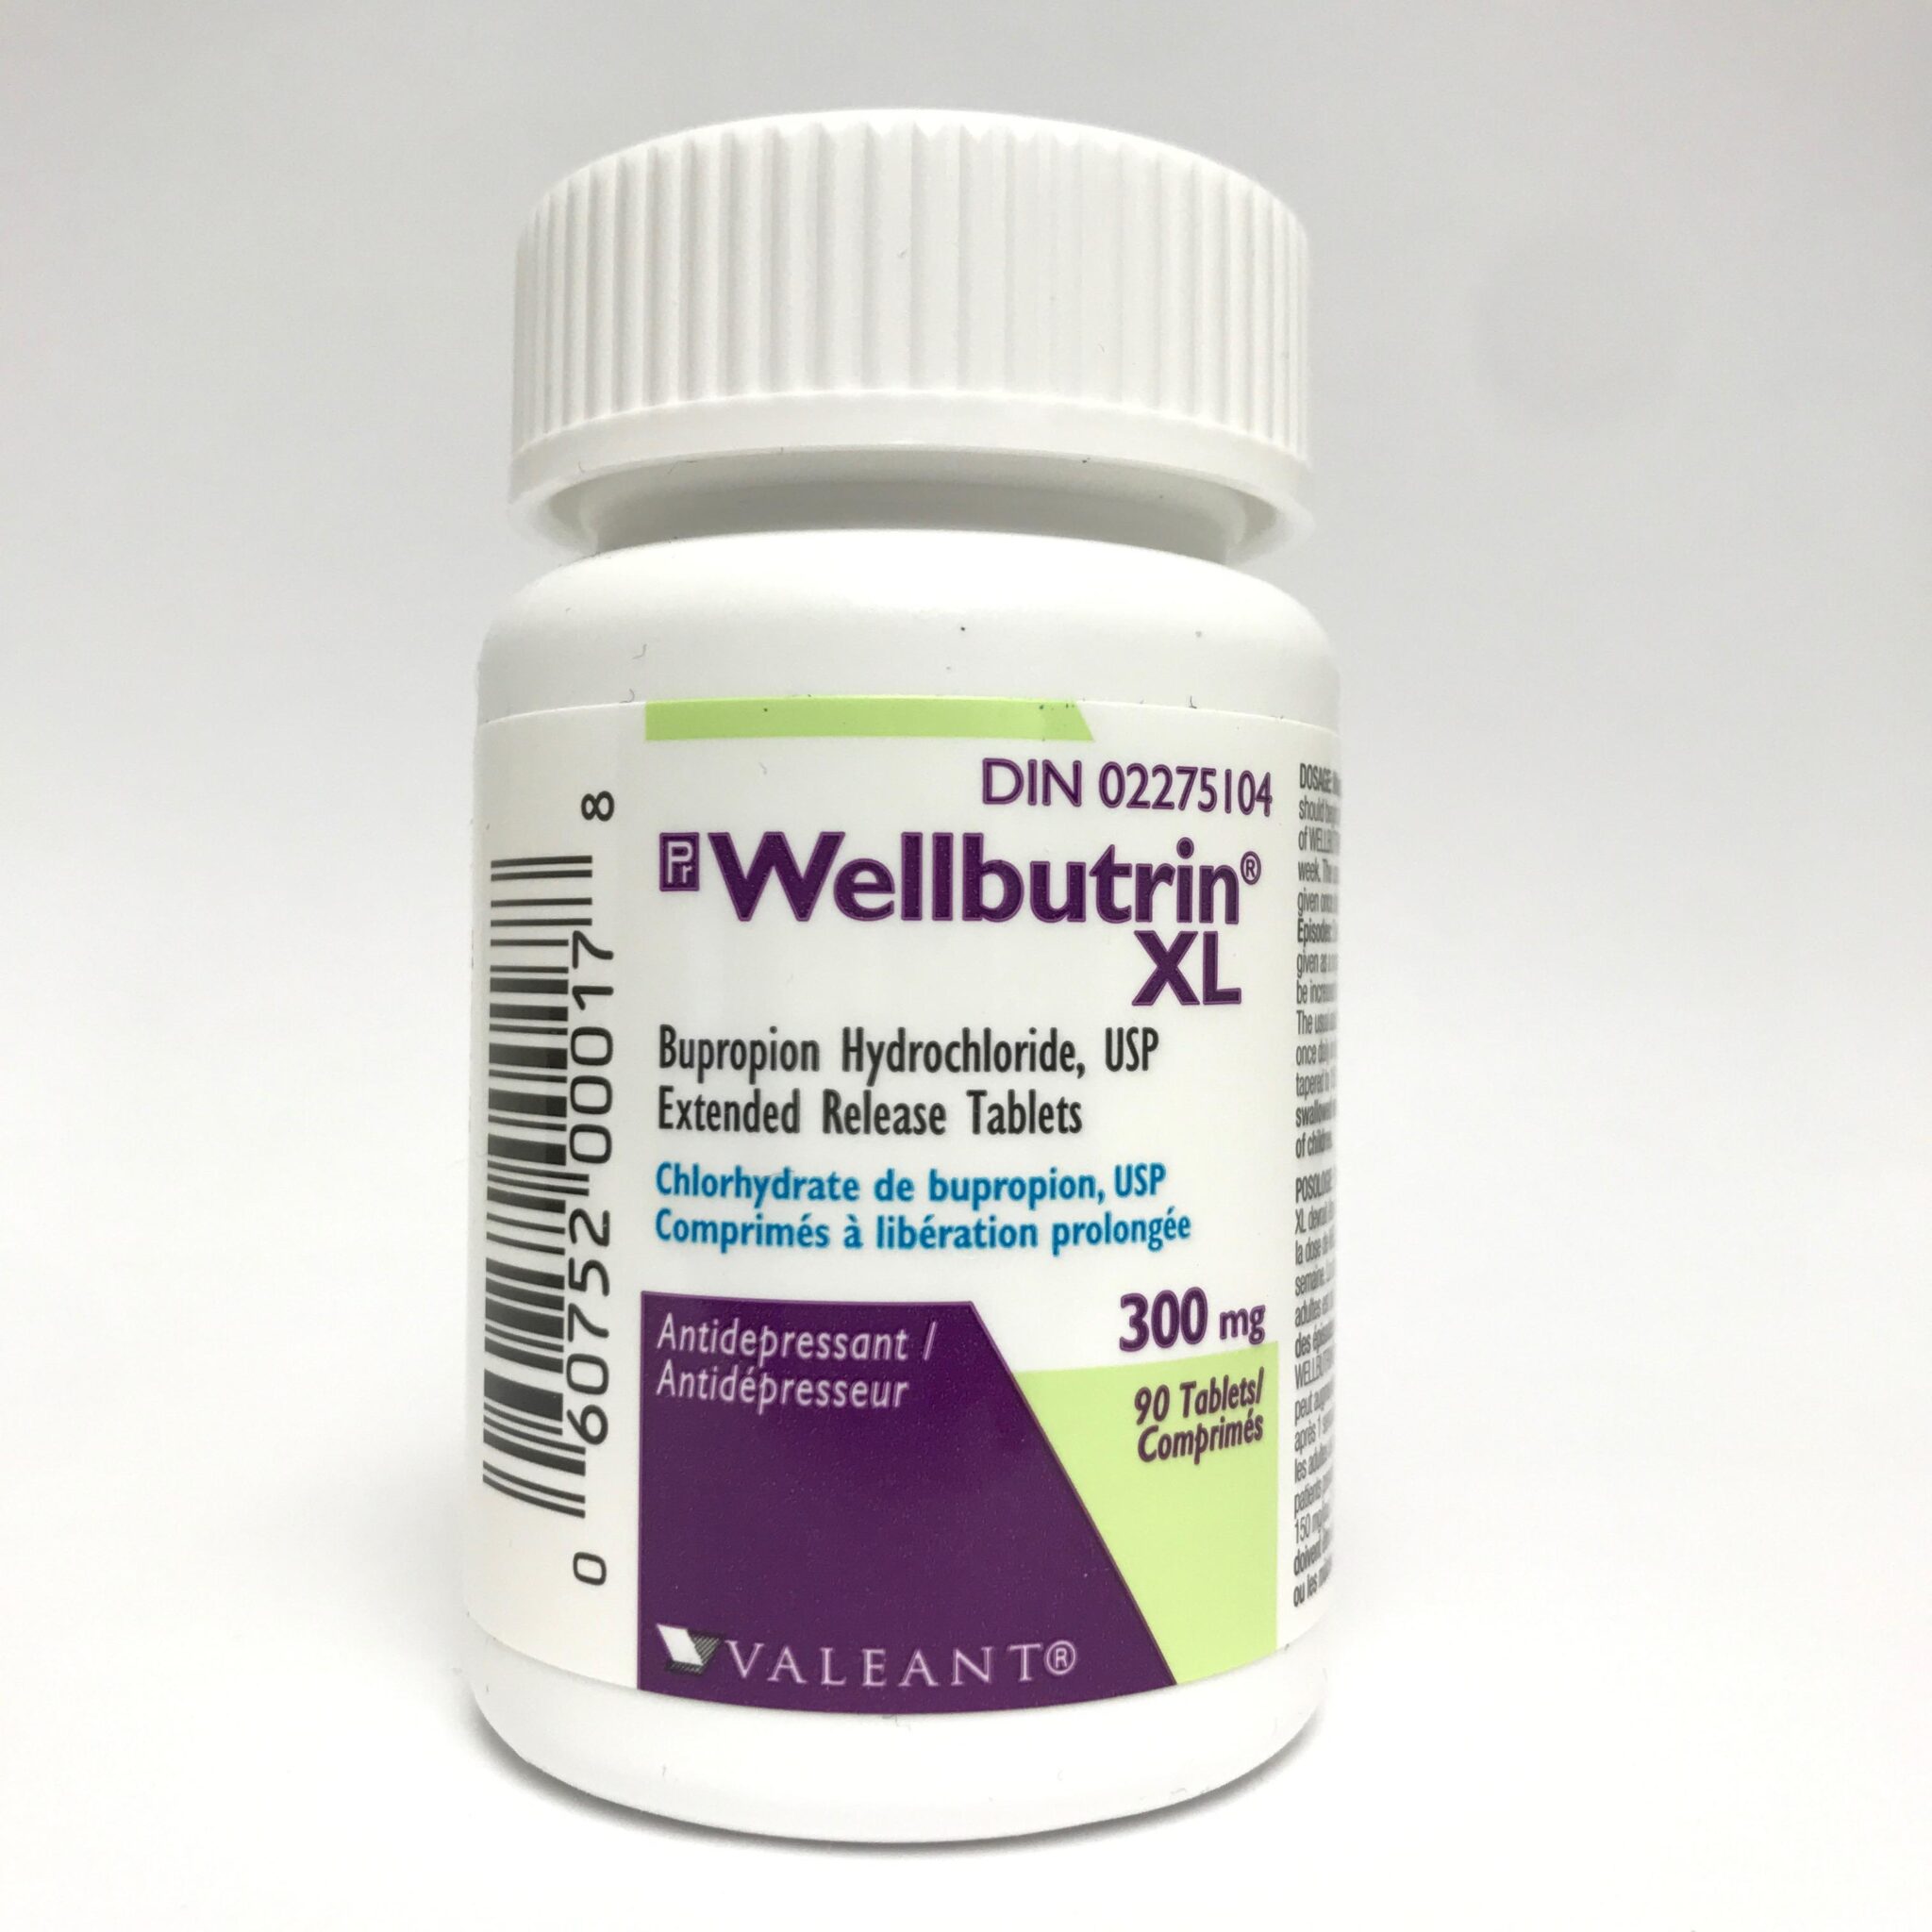 Buy Wellbutrin XL Online Safely From Your Canada Drug Store